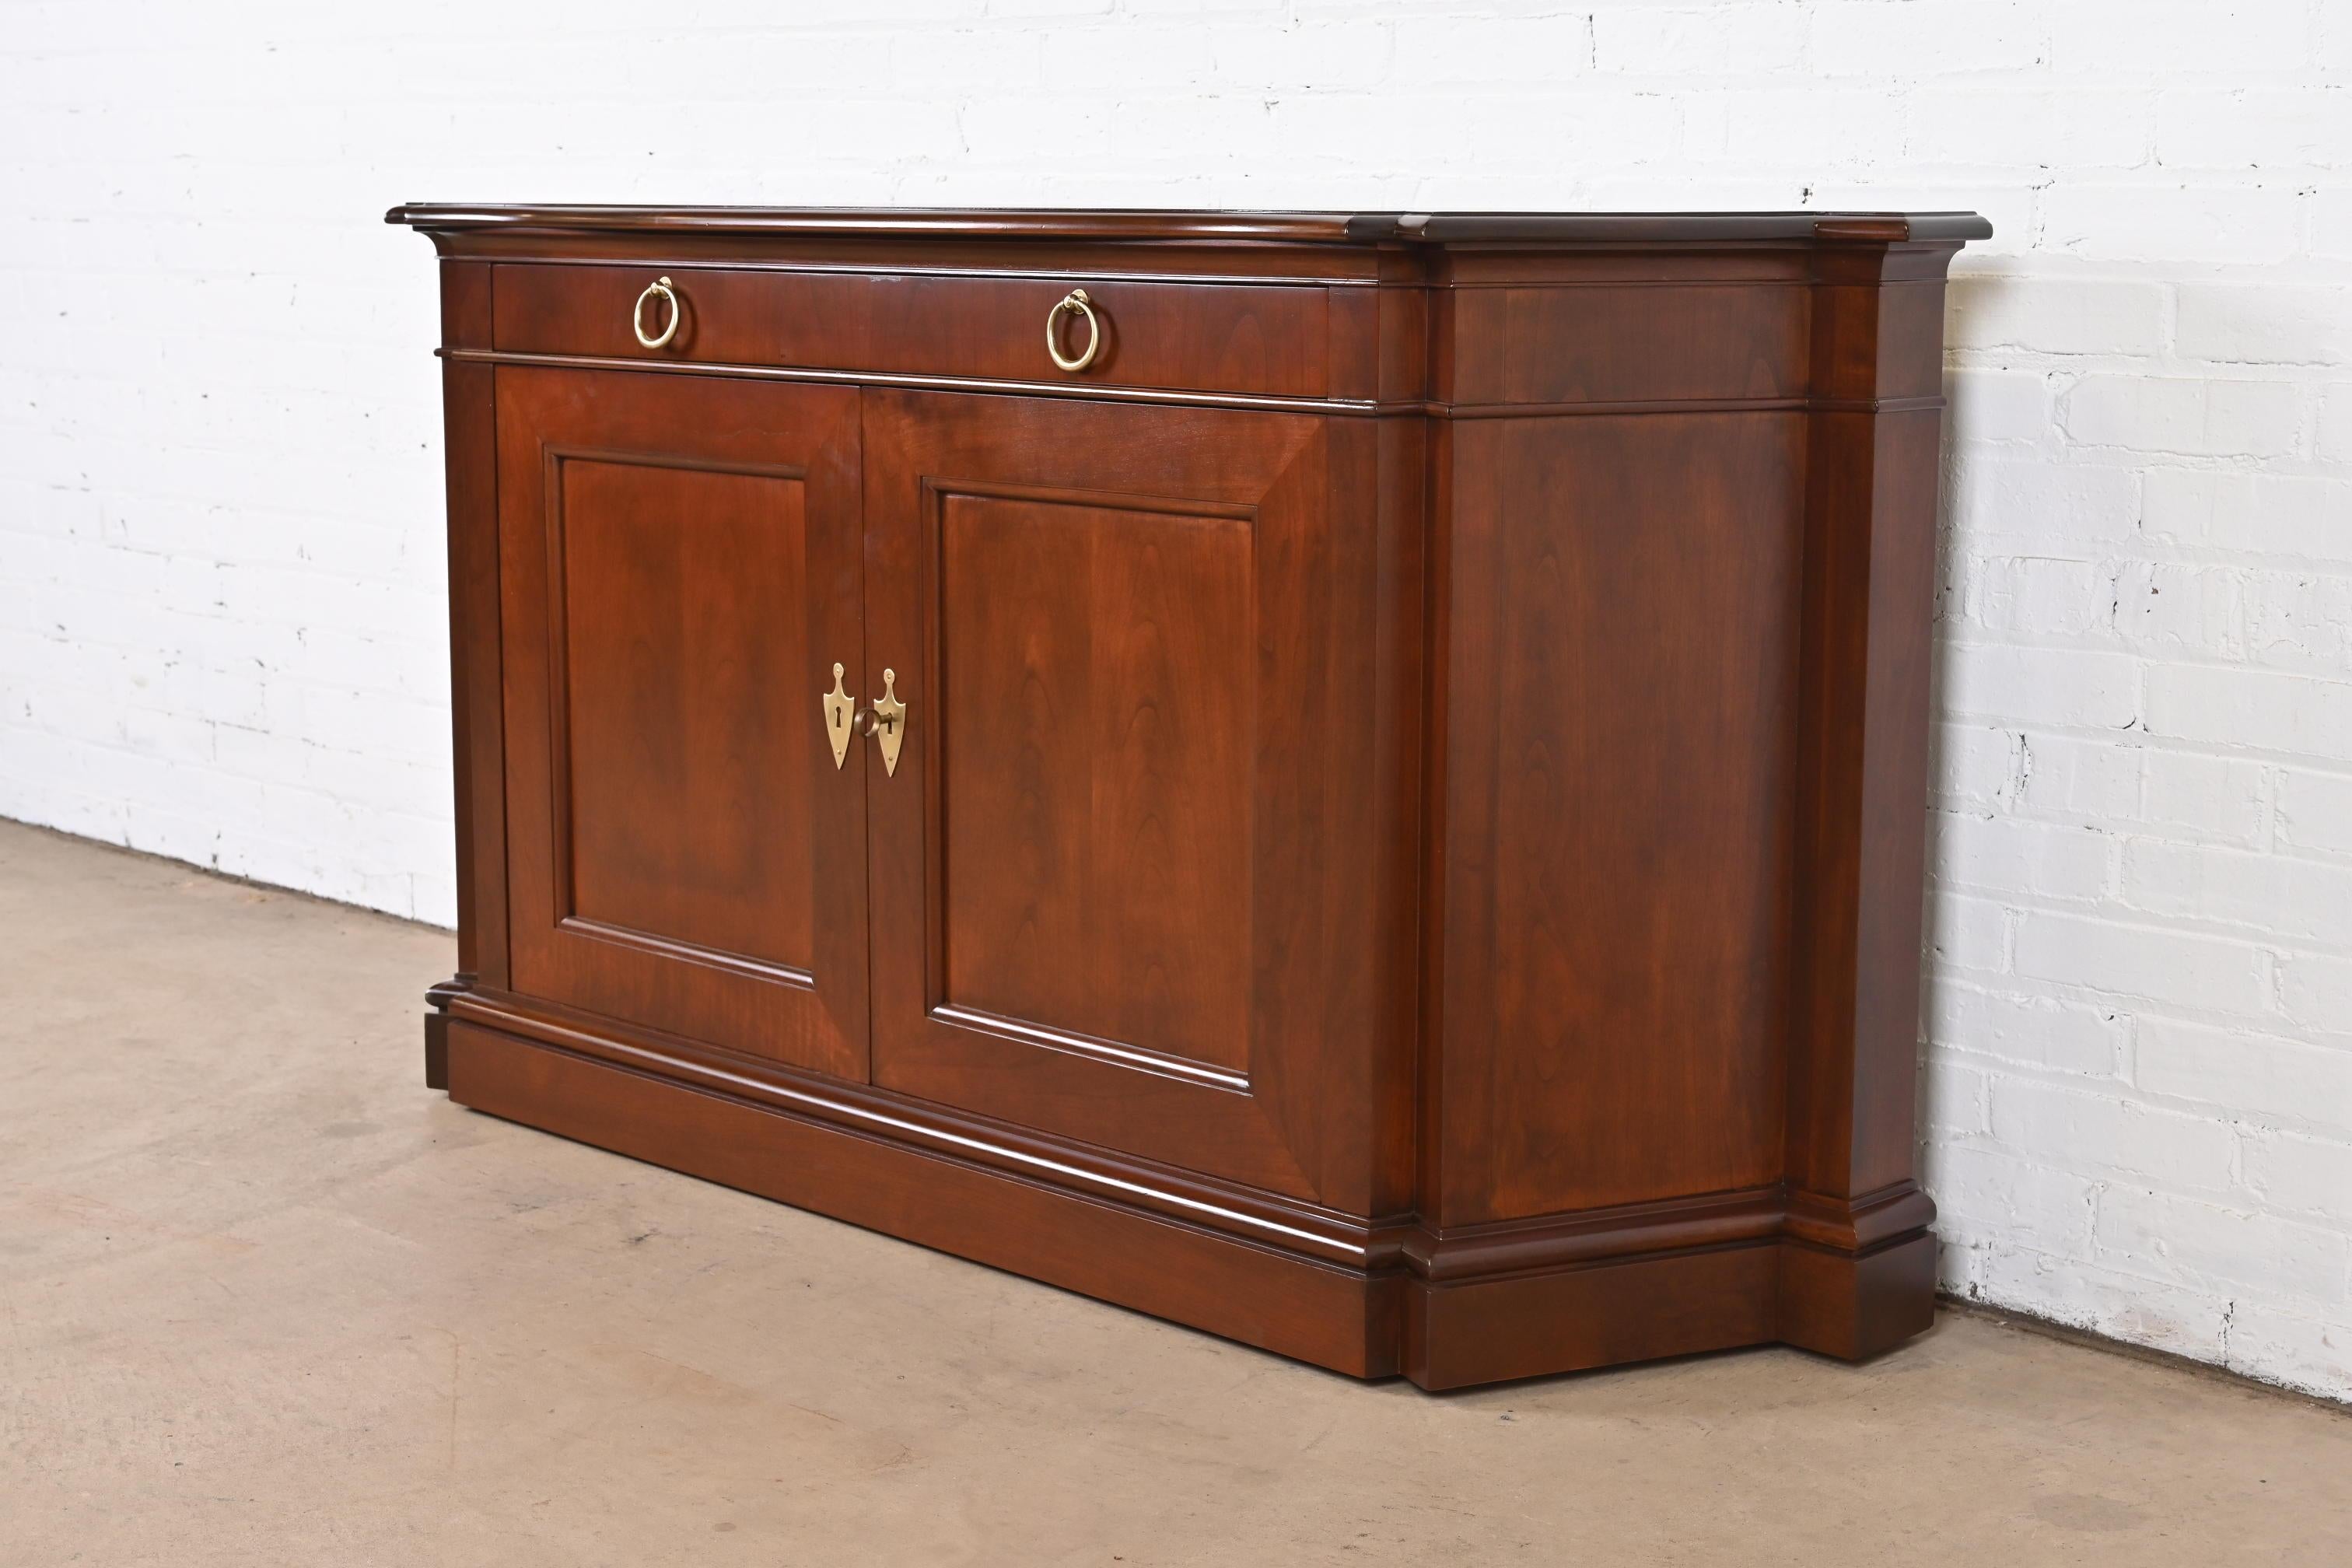 Mid-20th Century Baker Furniture French Regency Cherry Wood Sideboard or Bar Cabinet, Refinished